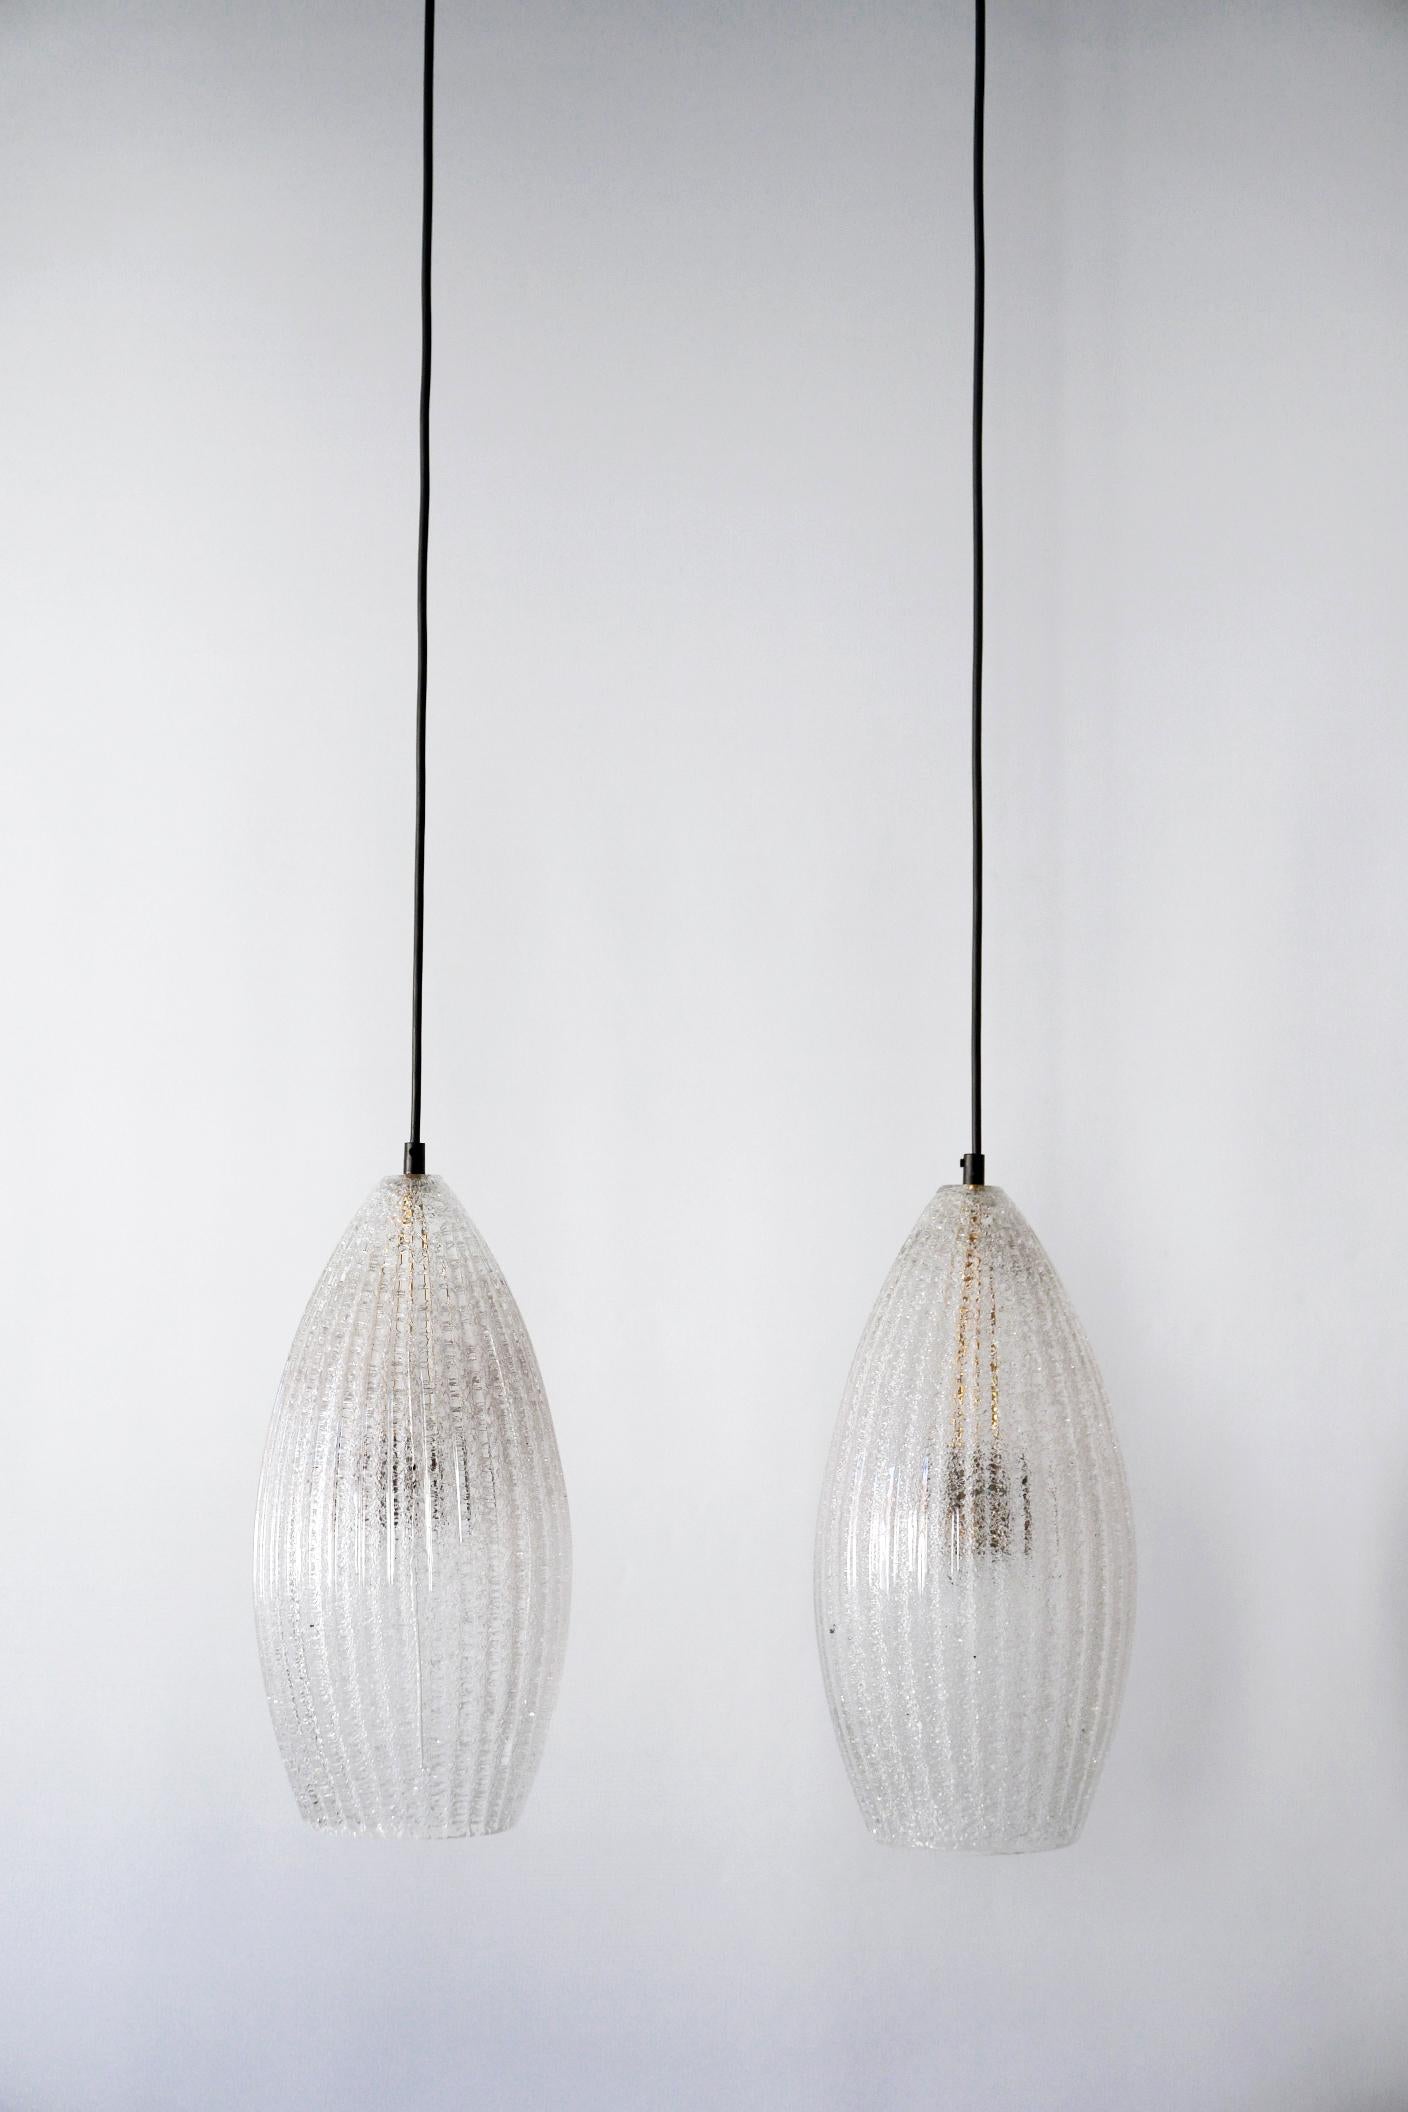 Set of Two Mid-Century Modern Textured Glass Pendant Lamps, 1960s, Germany For Sale 5